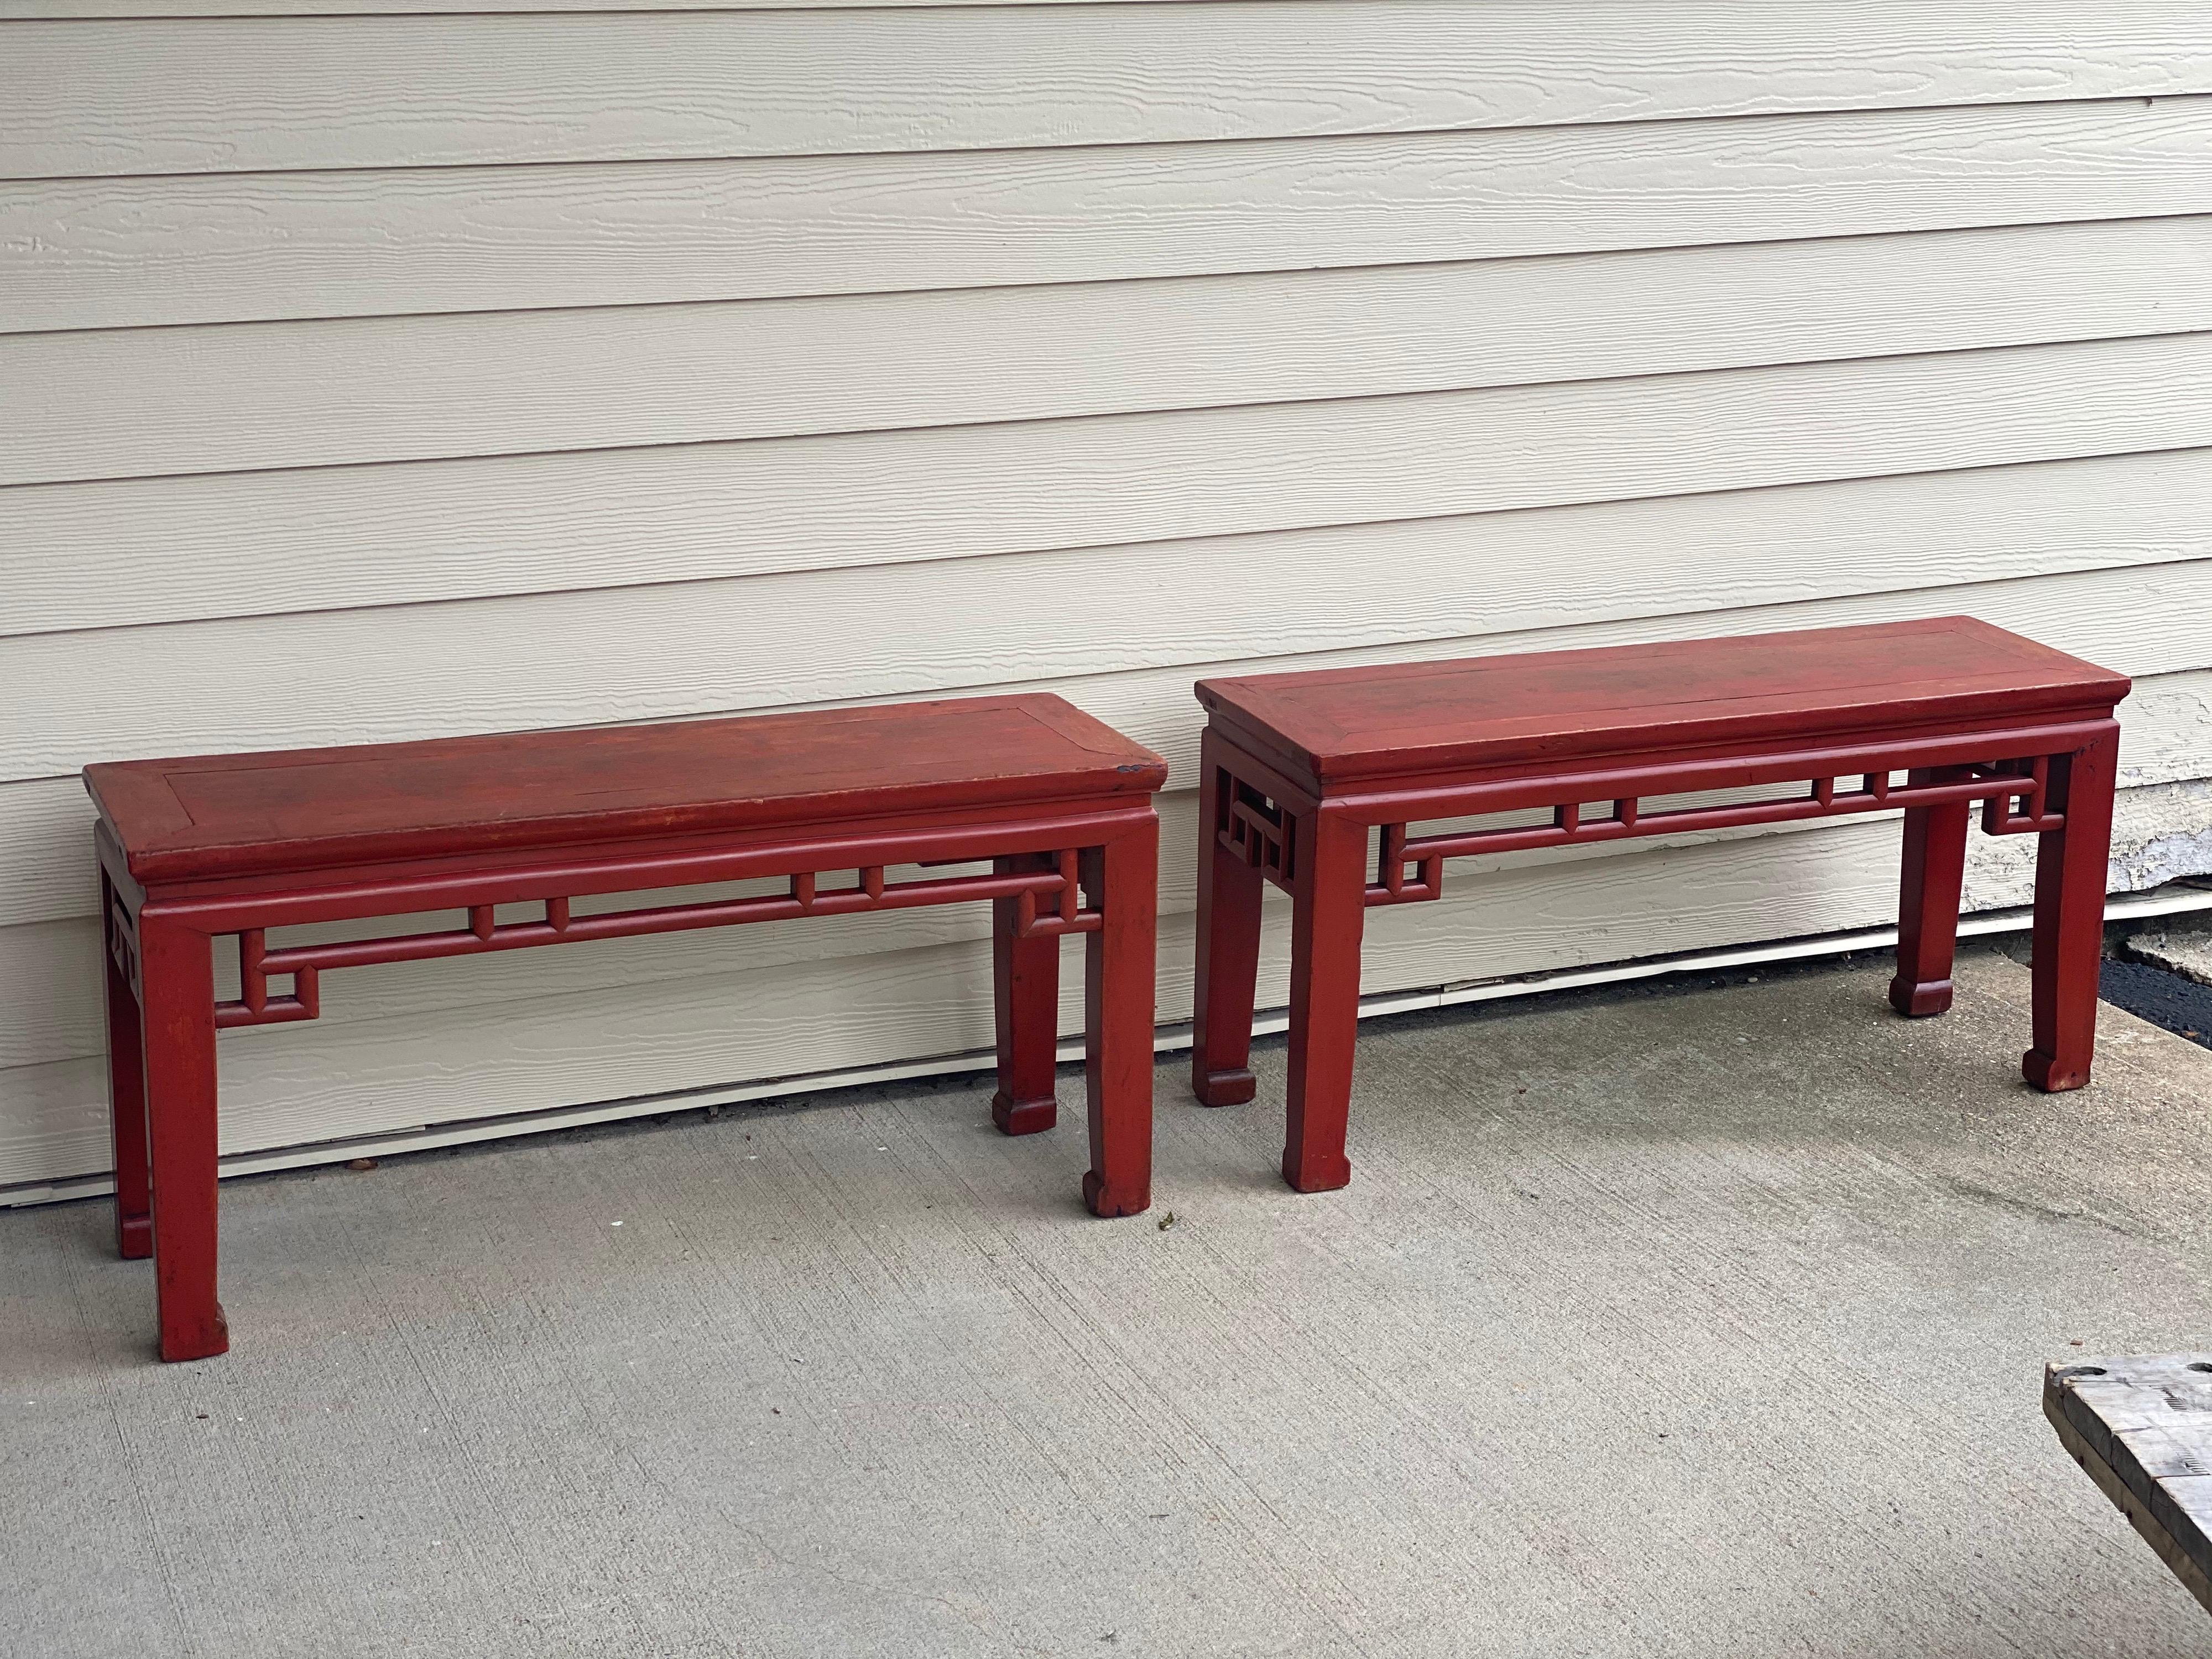 Pair of Chinese red lacquered low tables/benches
Lovely fret work on rail and sides. Classic Chinese Red Paint. Hoof feet. 
Expected wear to finish, mainly to the top.
Measures: 39.25